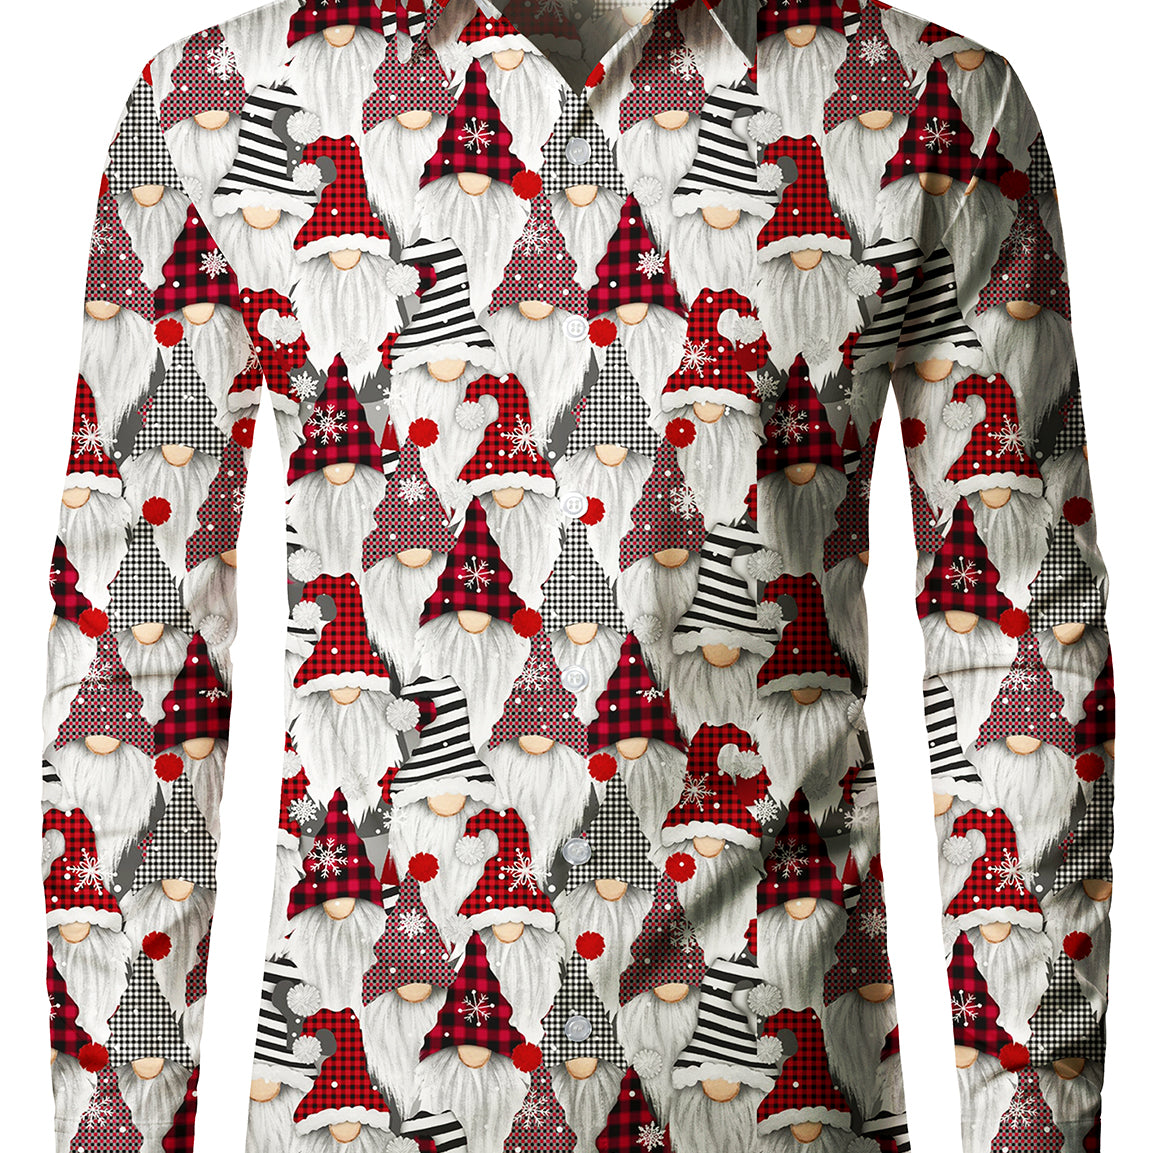 Men's Cute Gnome Christmas Button Up Xmas Day Holiday Long Sleeve Shirt